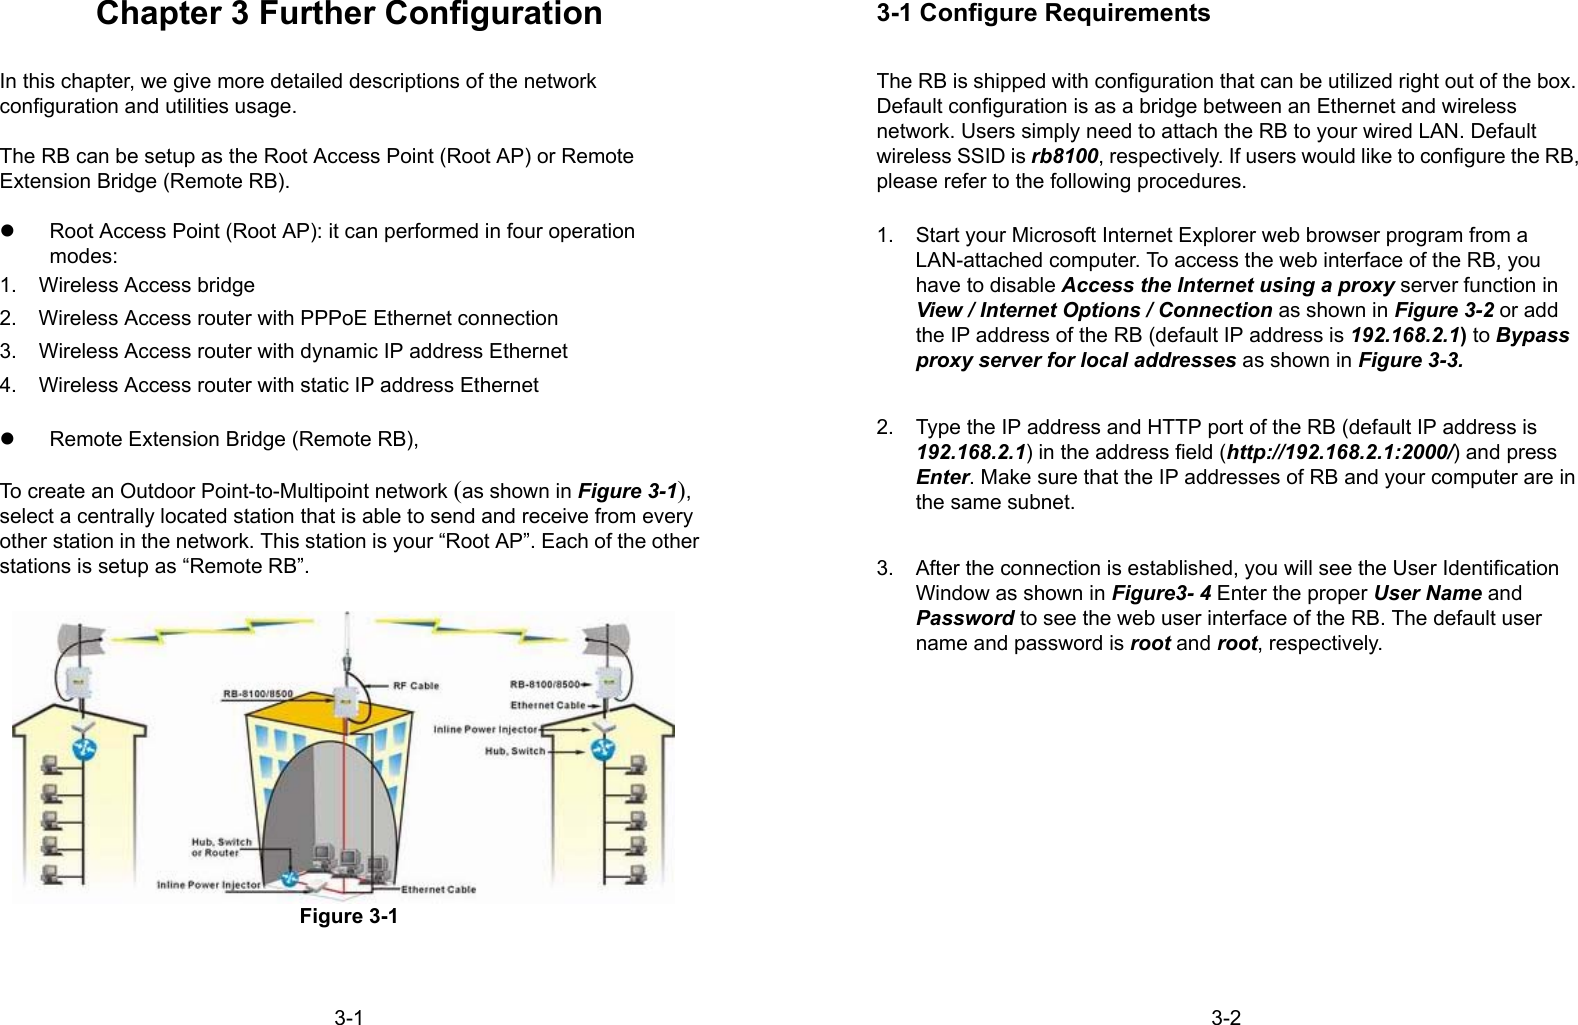 3-1Chapter 3 Further ConfigurationIn this chapter, we give more detailed descriptions of the networkconfiguration and utilities usage.The RB can be setup as the Root Access Point (Root AP) or RemoteExtension Bridge (Remote RB).z  Root Access Point (Root AP): it can performed in four operationmodes:1.  Wireless Access bridge2.  Wireless Access router with PPPoE Ethernet connection3.  Wireless Access router with dynamic IP address Ethernet4.  Wireless Access router with static IP address Ethernetz  Remote Extension Bridge (Remote RB),To create an Outdoor Point-to-Multipoint network (as shown in Figure 3-1),select a centrally located station that is able to send and receive from everyother station in the network. This station is your “Root AP”. Each of the otherstations is setup as “Remote RB”.Figure 3-13-23-1 Configure RequirementsThe RB is shipped with configuration that can be utilized right out of the box.Default configuration is as a bridge between an Ethernet and wirelessnetwork. Users simply need to attach the RB to your wired LAN. Defaultwireless SSID is rb8100, respectively. If users would like to configure the RB,please refer to the following procedures.1.  Start your Microsoft Internet Explorer web browser program from aLAN-attached computer. To access the web interface of the RB, youhave to disable Access the Internet using a proxy server function inView / Internet Options / Connection as shown in Figure 3-2 or addthe IP address of the RB (default IP address is 192.168.2.1) to Bypassproxy server for local addresses as shown in Figure 3-3.2.  Type the IP address and HTTP port of the RB (default IP address is192.168.2.1) in the address field (http://192.168.2.1:2000/) and pressEnter. Make sure that the IP addresses of RB and your computer are inthe same subnet.3.  After the connection is established, you will see the User IdentificationWindow as shown in Figure3- 4 Enter the proper User Name andPassword to see the web user interface of the RB. The default username and password is root and root, respectively.